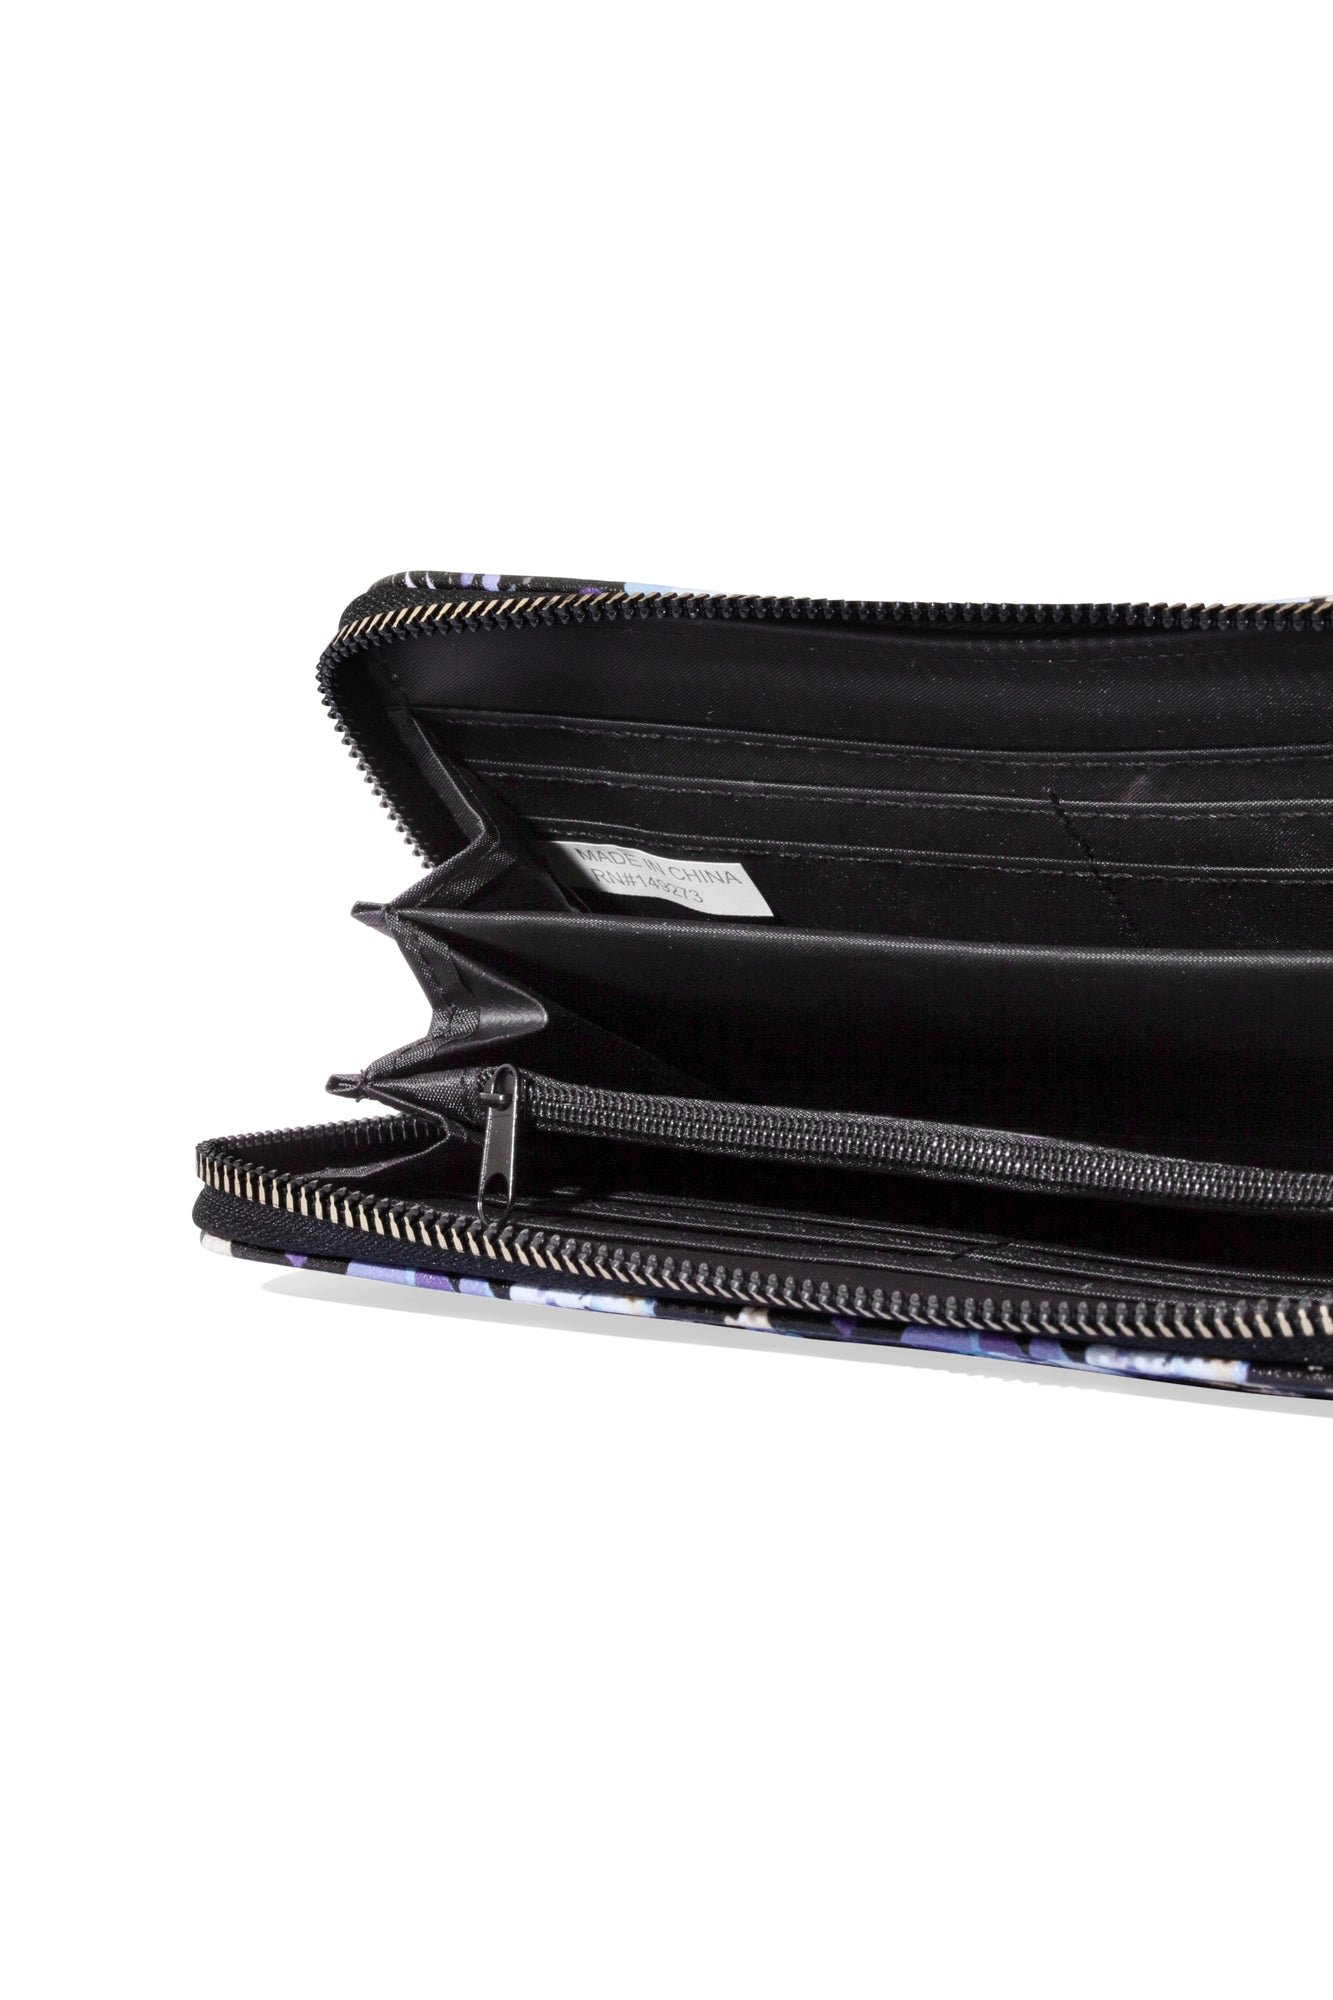 Interior of wallet with multiple pockets